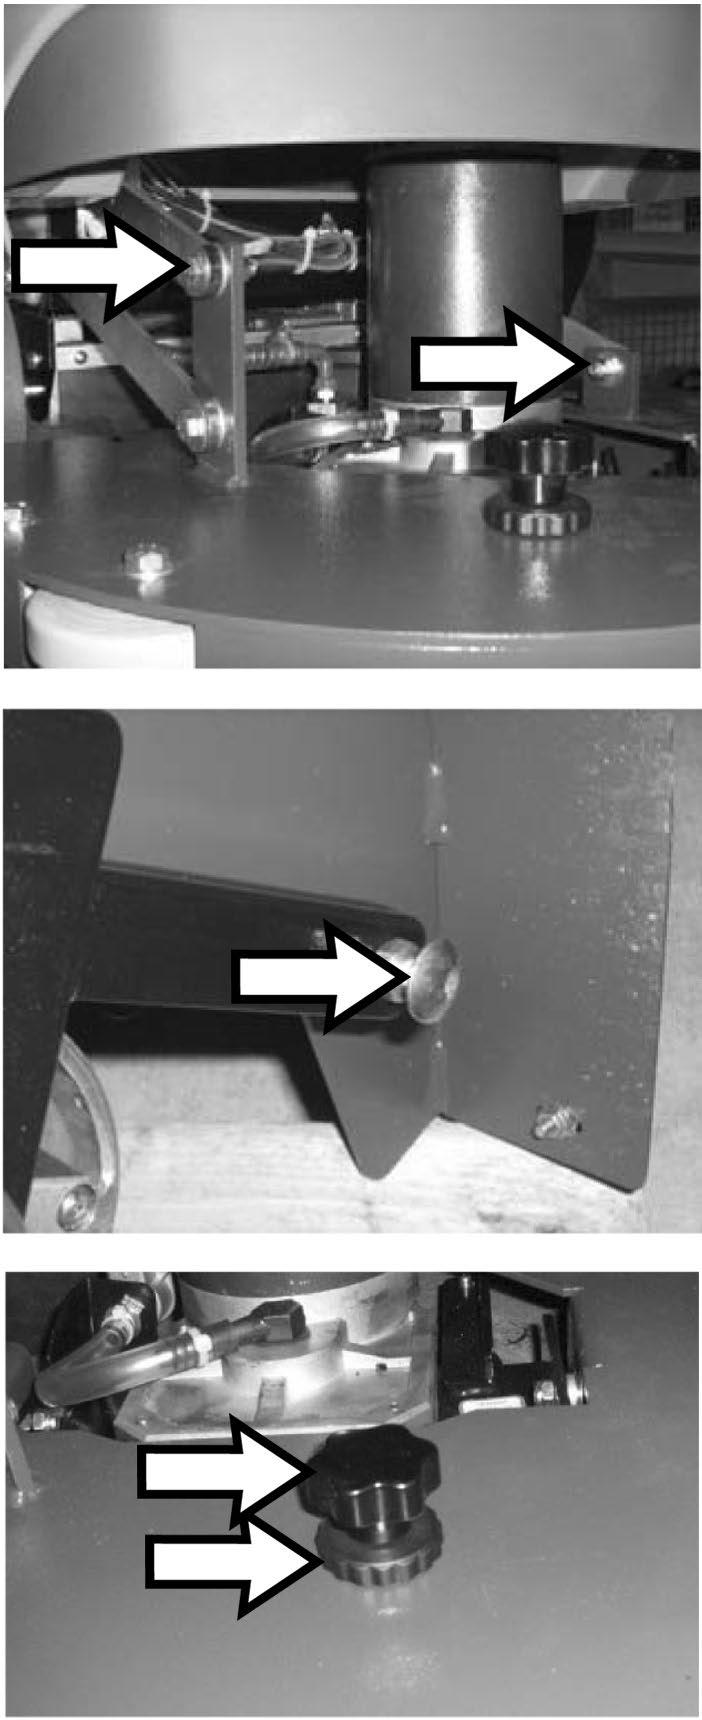 BRUSH BASE ADJUSTMENT 1. Verify the right inclination of the brush deck. To adjust the brush deck: A. Lower the brush deck on the floor with the brush. B. Loosen the M8 bolt and the M8 nut that attach the brush deck to the left arm.